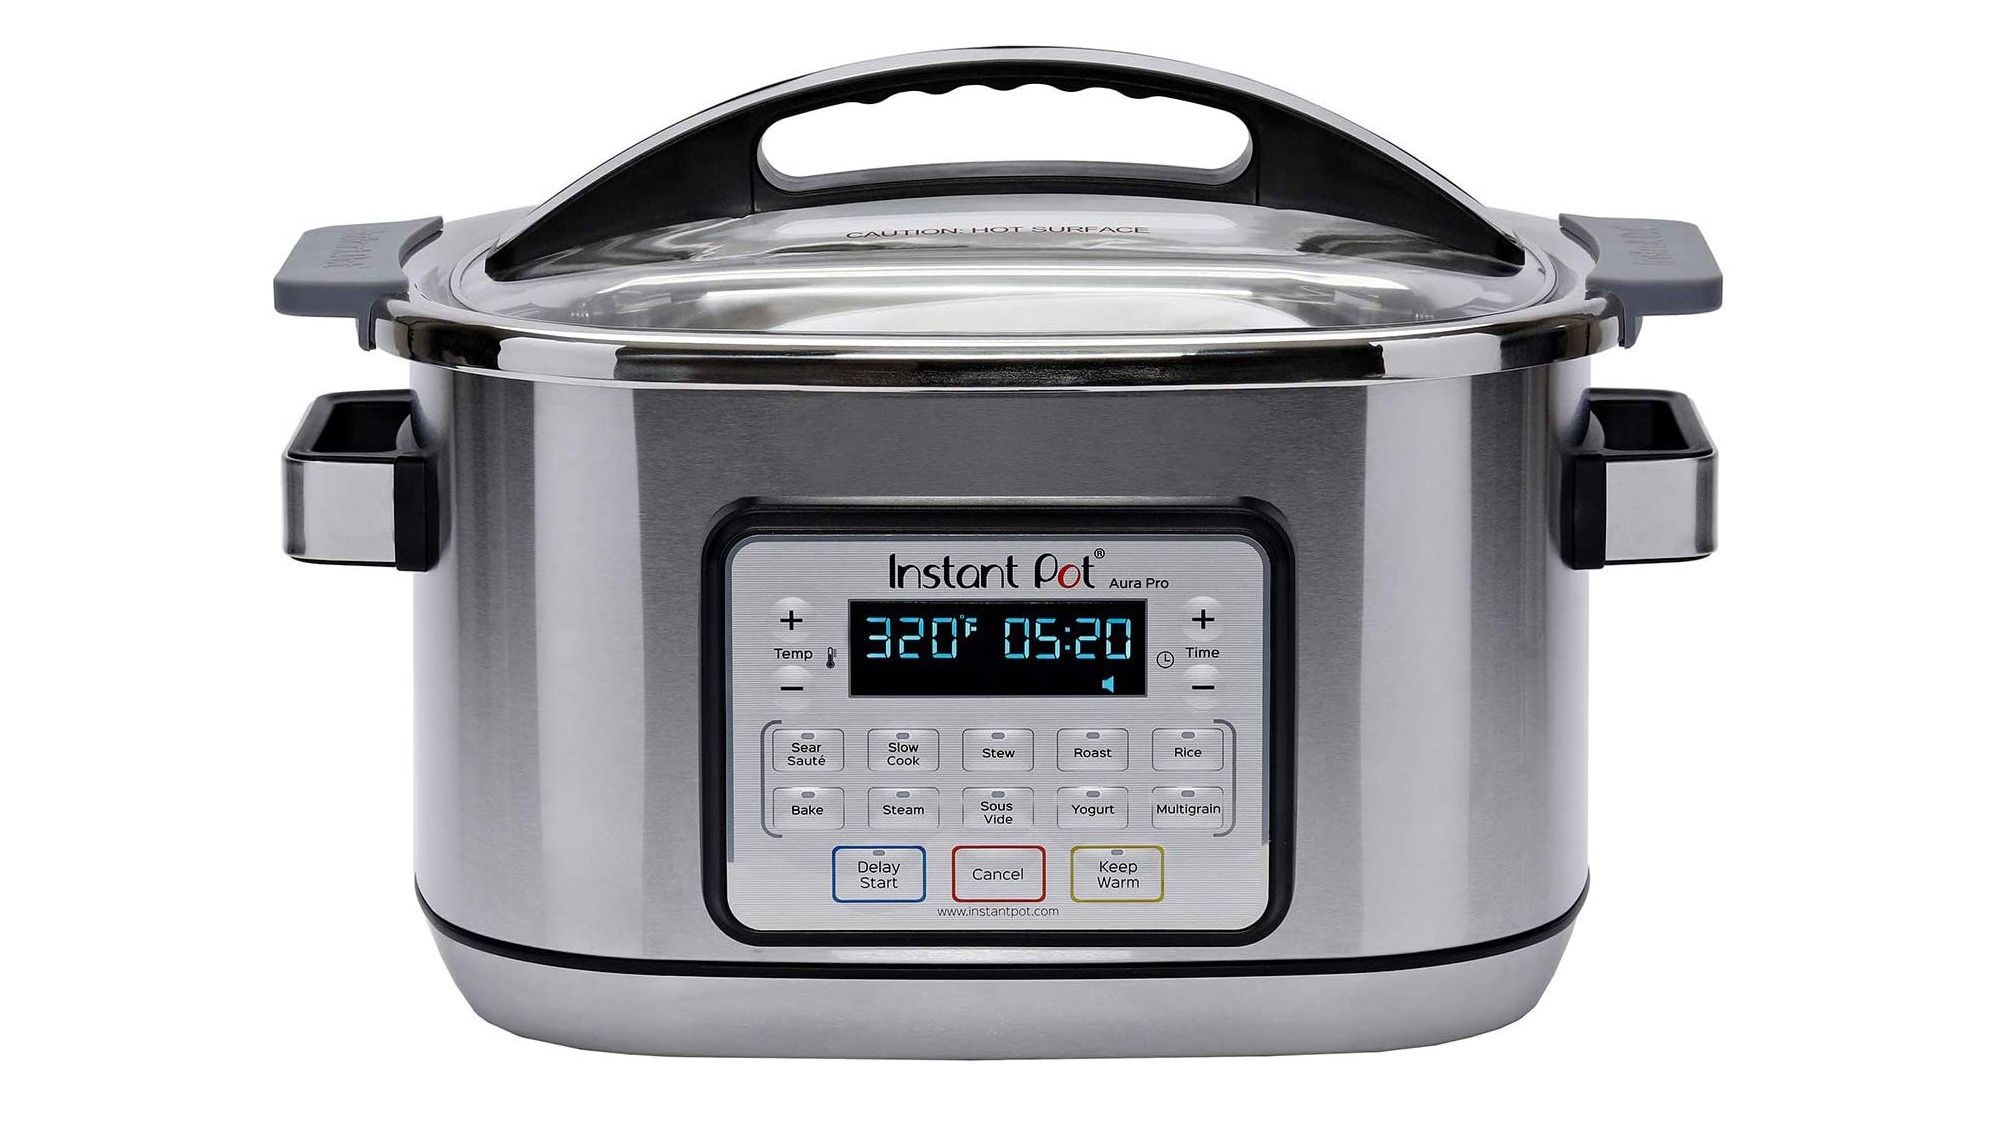  Instant  Pot s  Aura Slow  Cooker  Can Also Roast Bake and 